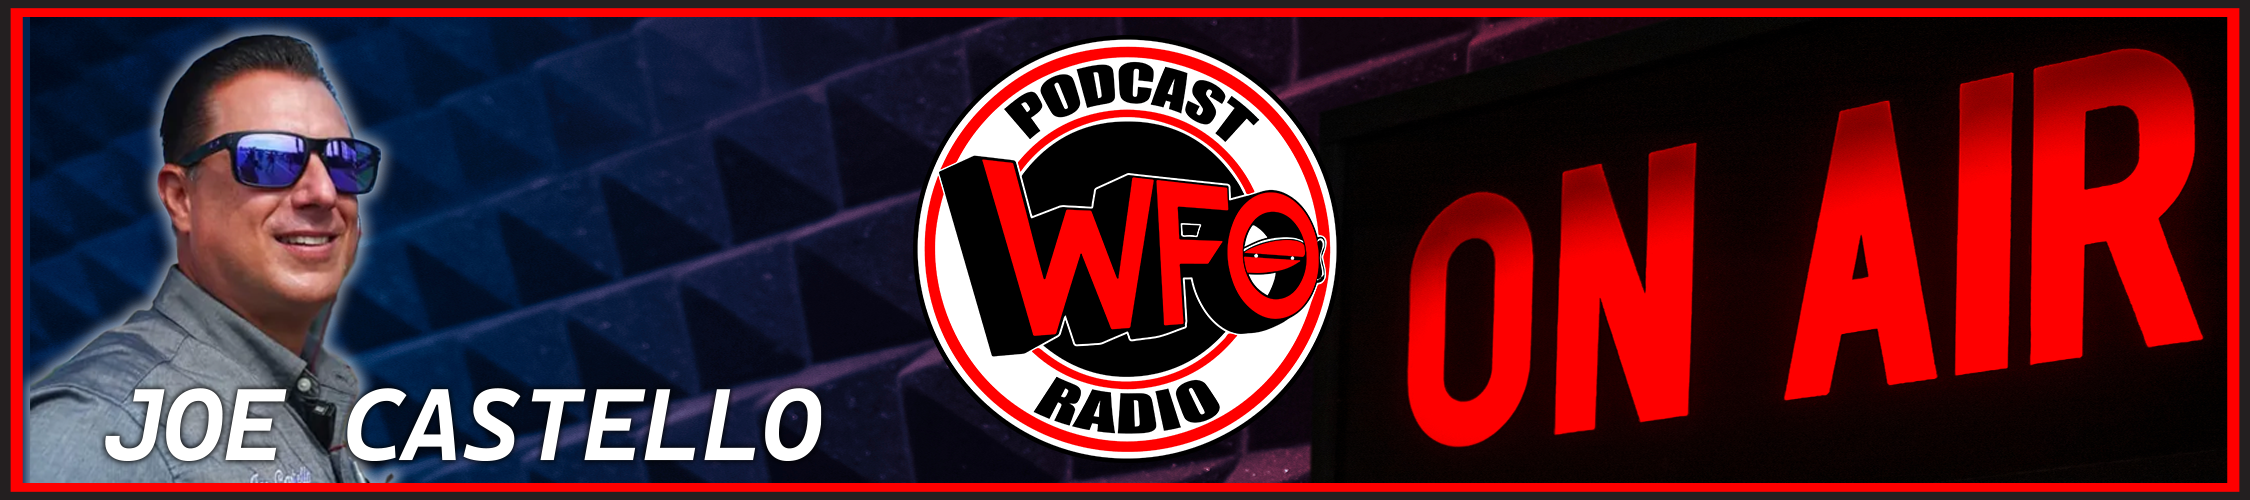 About WFO Radio